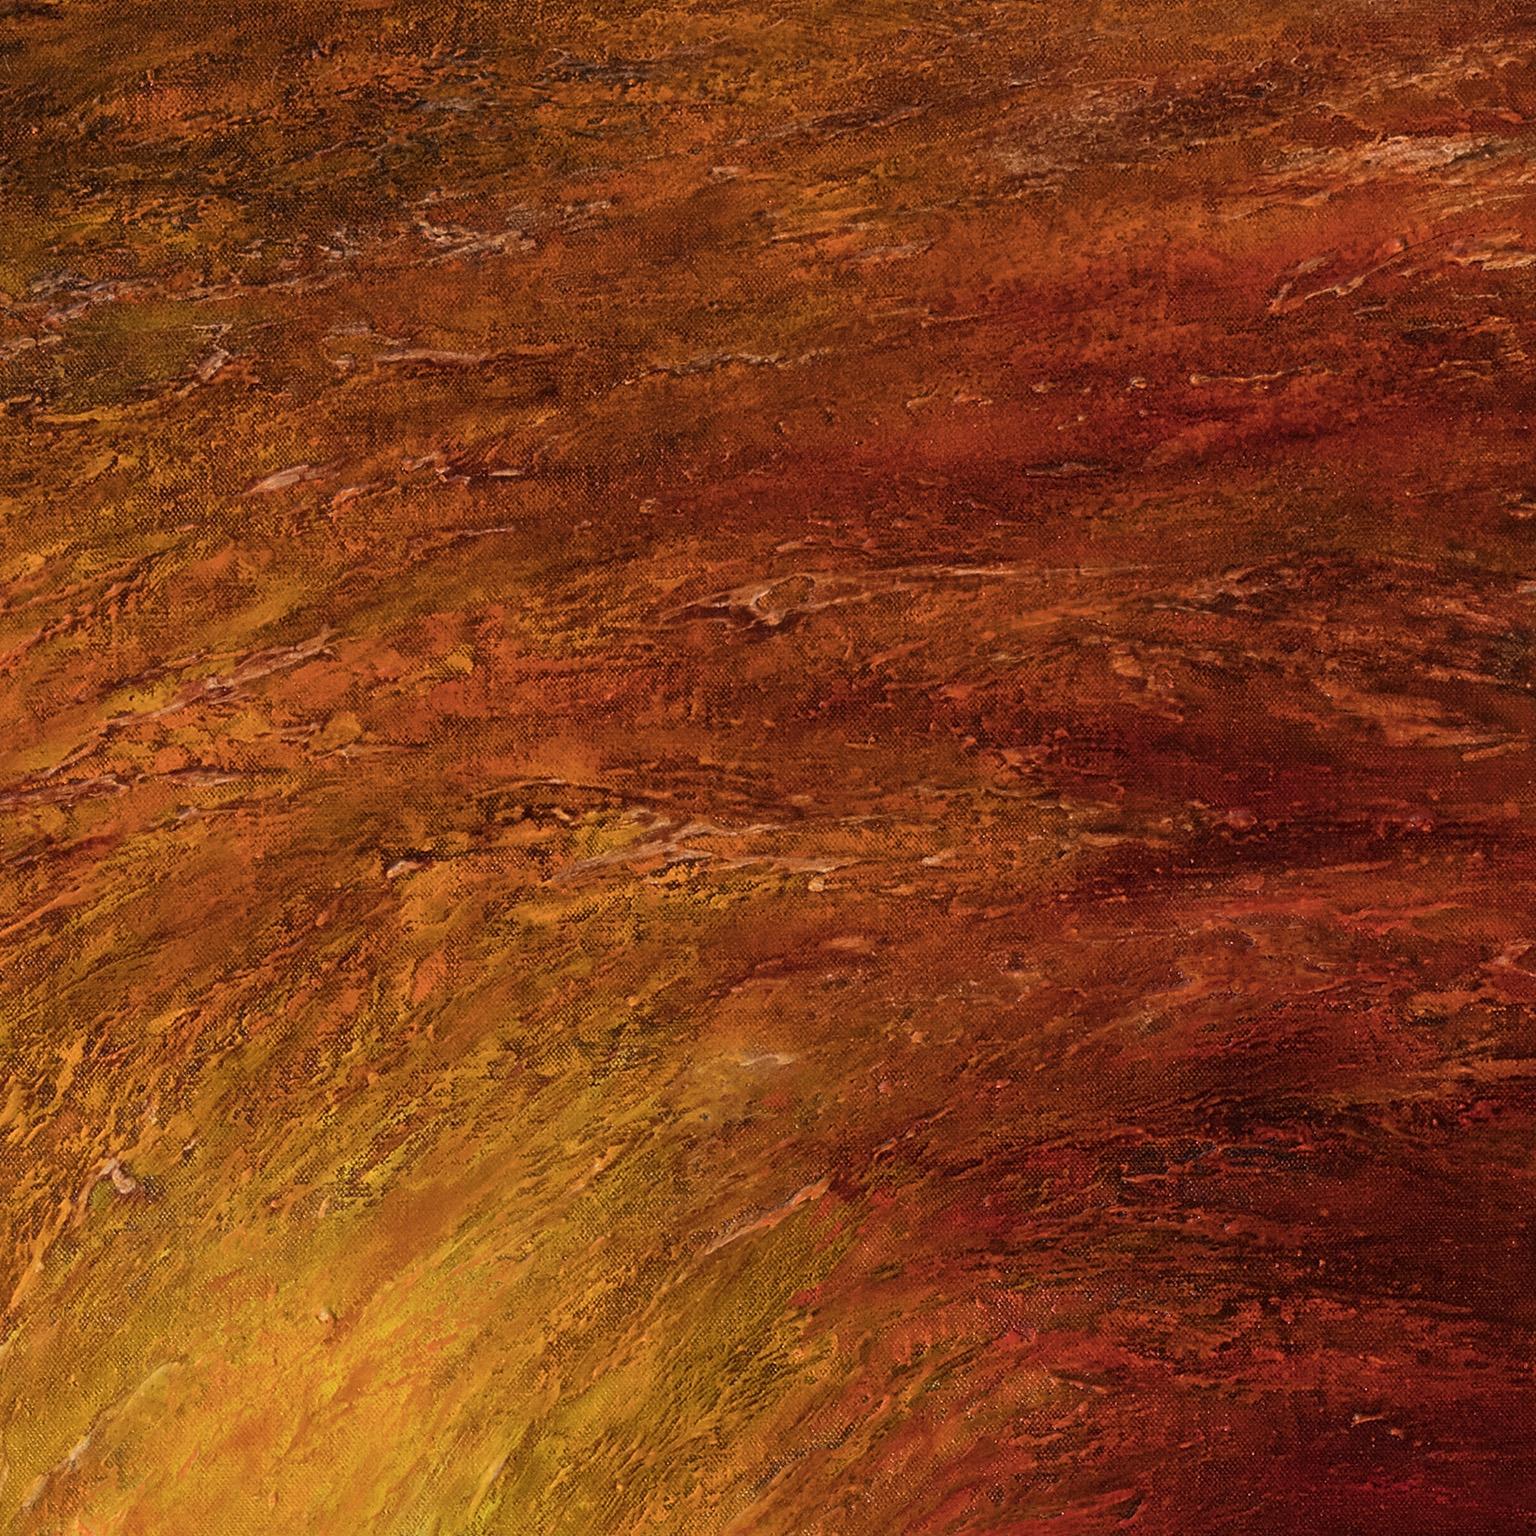 Ruggero Vanni's Occasus (Sunset or West in Latin) is a 52 x 78.5 inch abstract gestural oil painting. It is an abstract landscape of colors and light, a whirlwind of intense shades of reds and yellow. The vibrant and intense display of red and